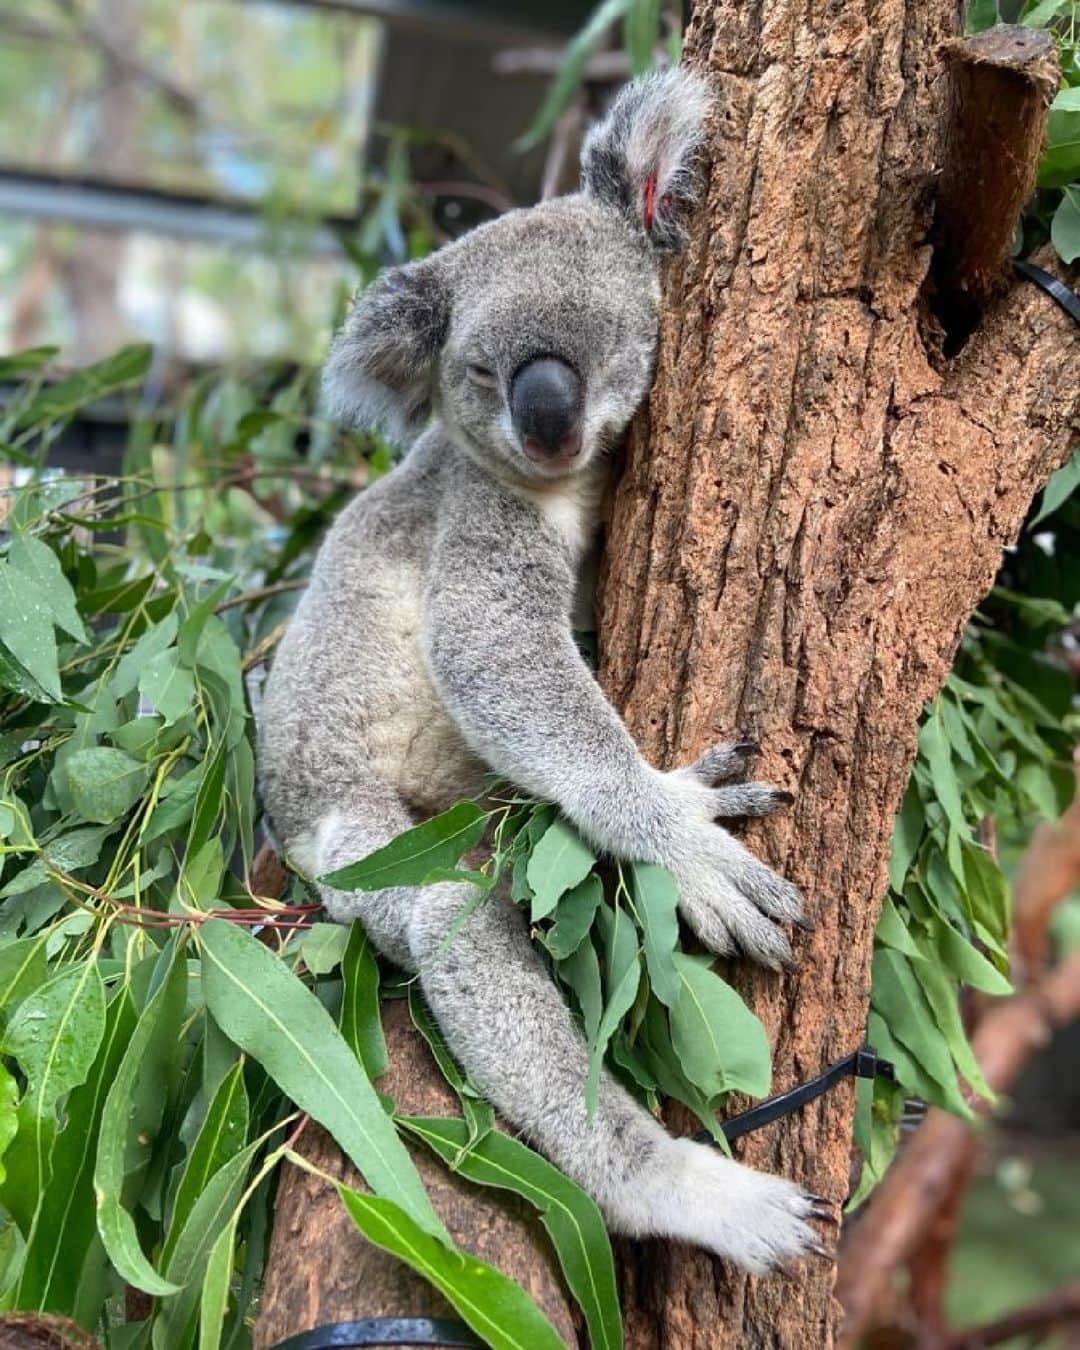 Australiaのインスタグラム：「That feeling when you've hit snooze for the third time... 🙄🐨 You'll find this sleepy fella and his mates at @visitnsw's @portmacquariekoalahospital. Located in @visitnsw's @portmacquarie, it's the world's first hospital dedicated solely to the care and conservation of #koalas - pretty special, huh? Pop in to find out more about the incredible work they do here, visit the museum, or even adopt a koala to support their rescue, treatment, and habitat conservation efforts! We're feeling all that koala-ty love from here 🫶🏻   #SeeAustralia #ComeAndSayGday #FeelNSW #PortMacquarie  ID: a koala leans sleepily against a tree trunk, one eye closed the other lazily looking towards the camera.」